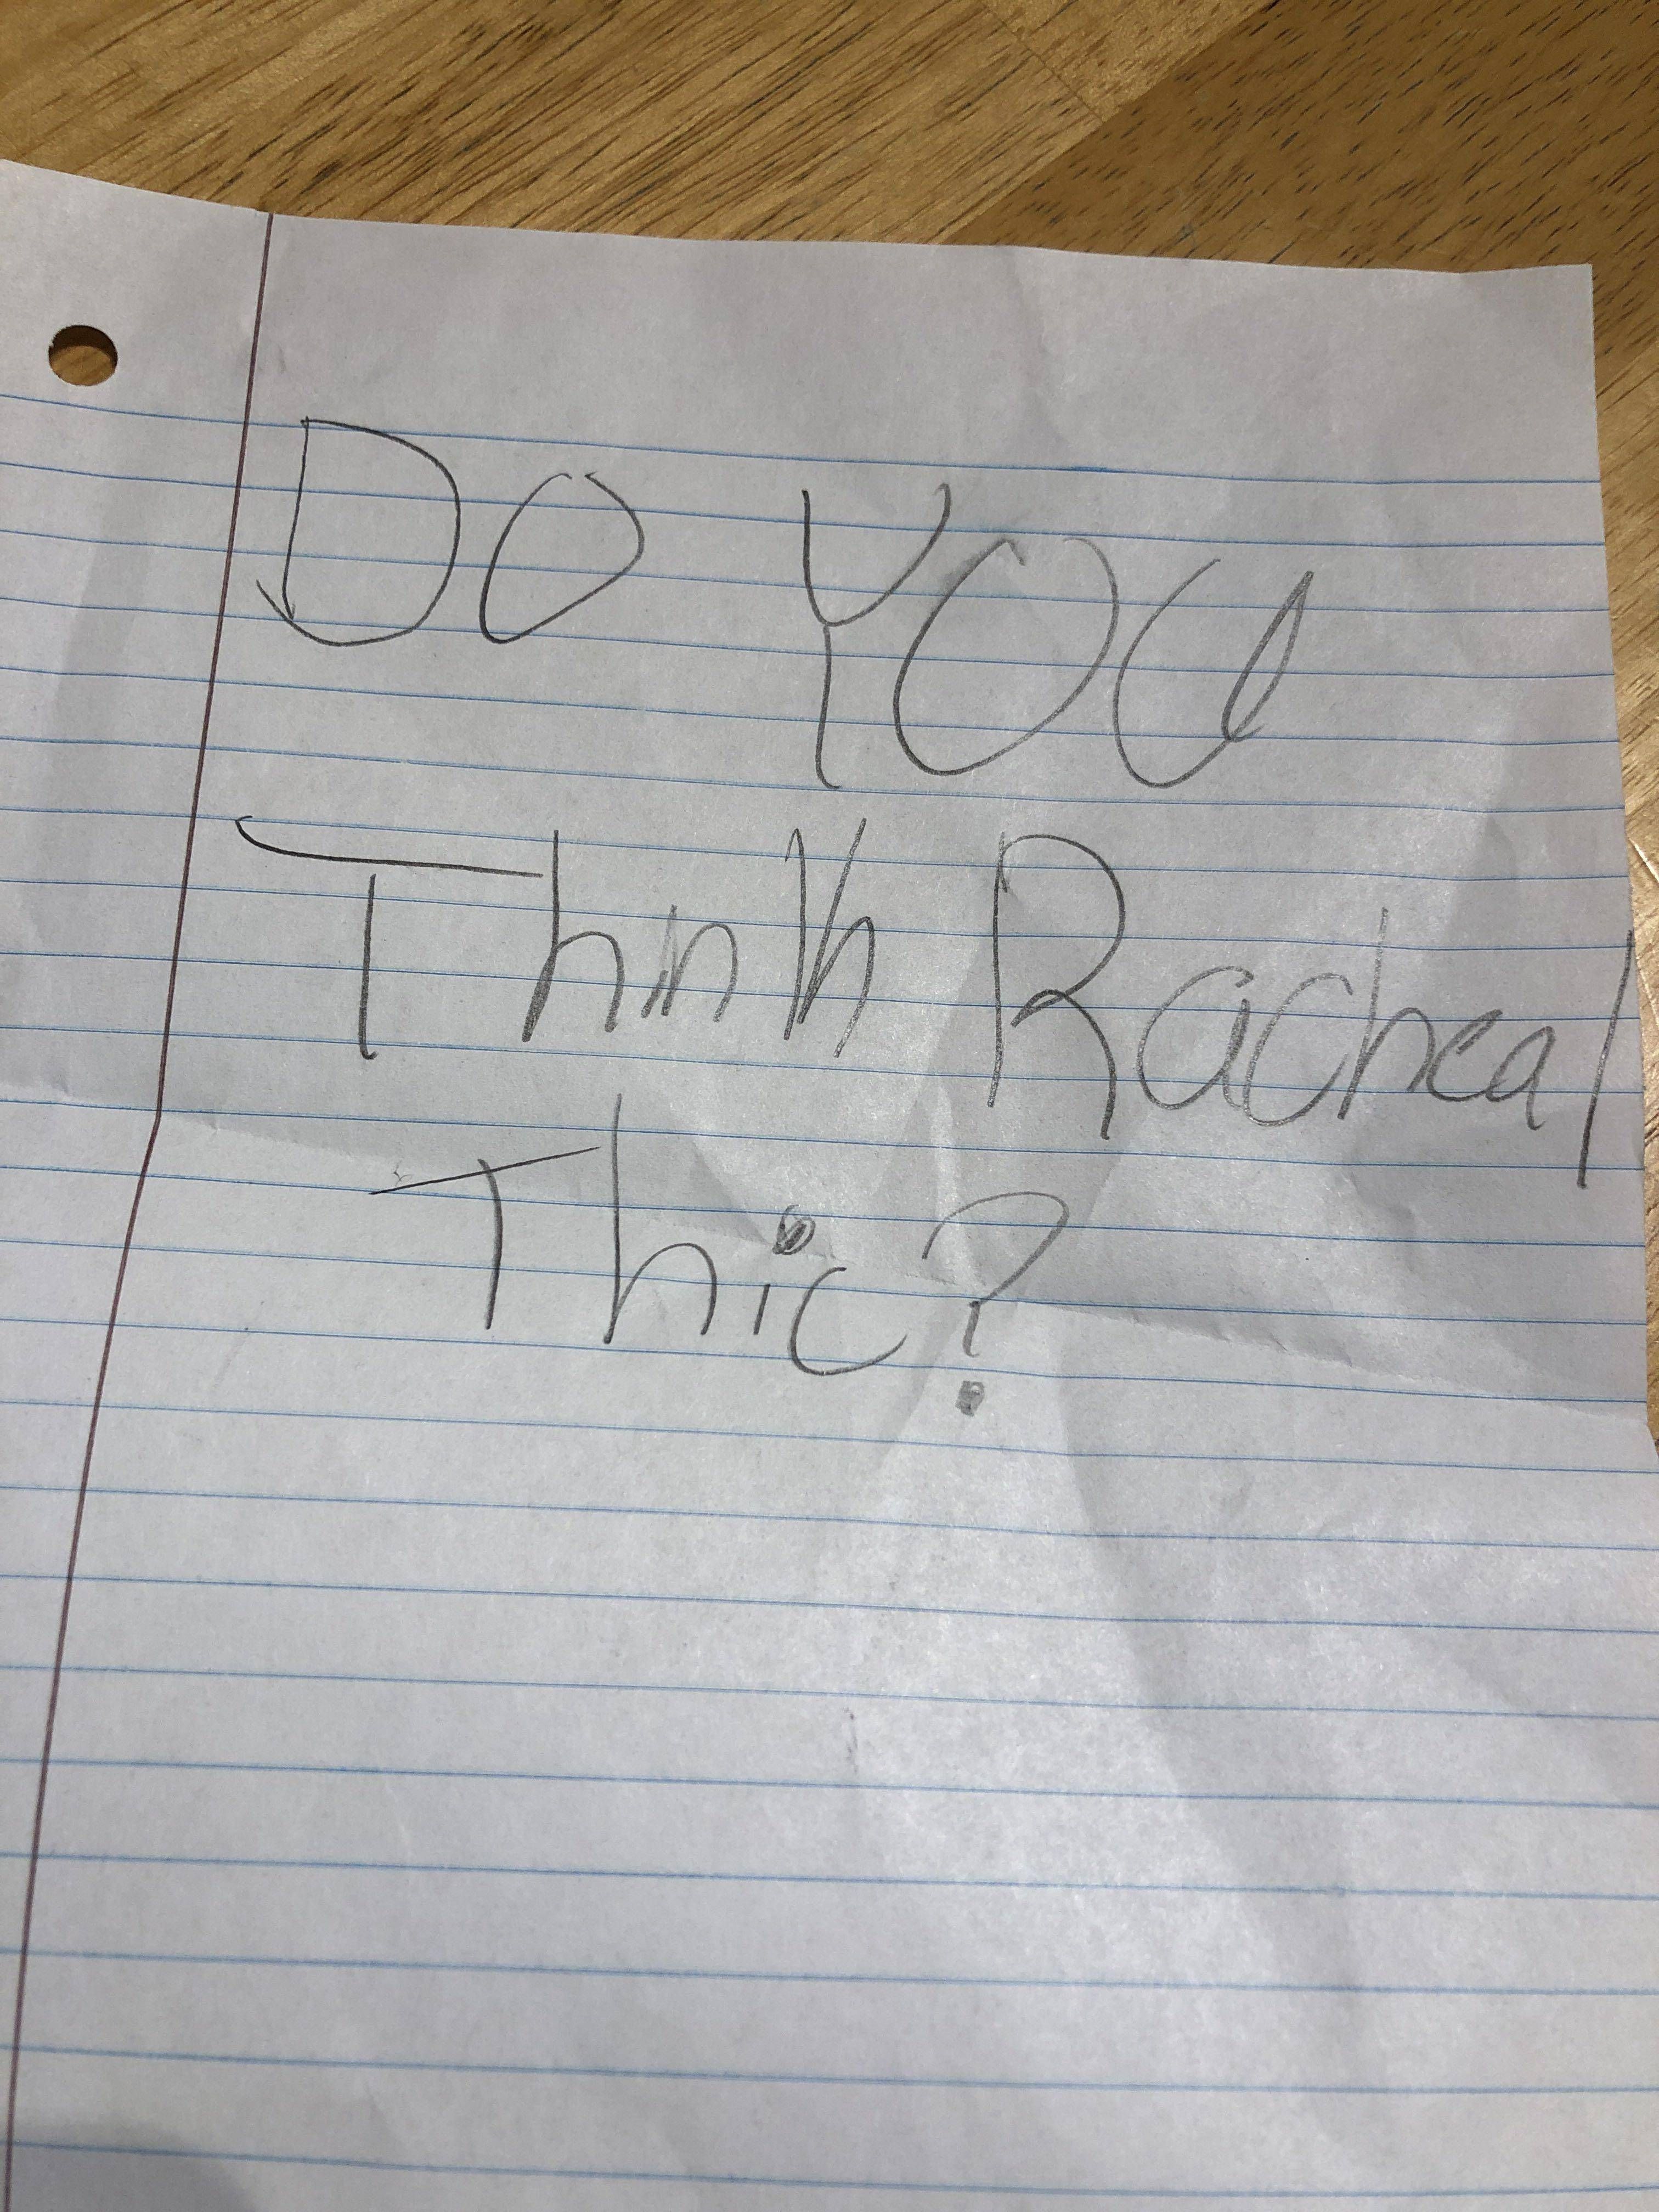 My wife confiscated this note from a student today on her first day of substitute teacher.